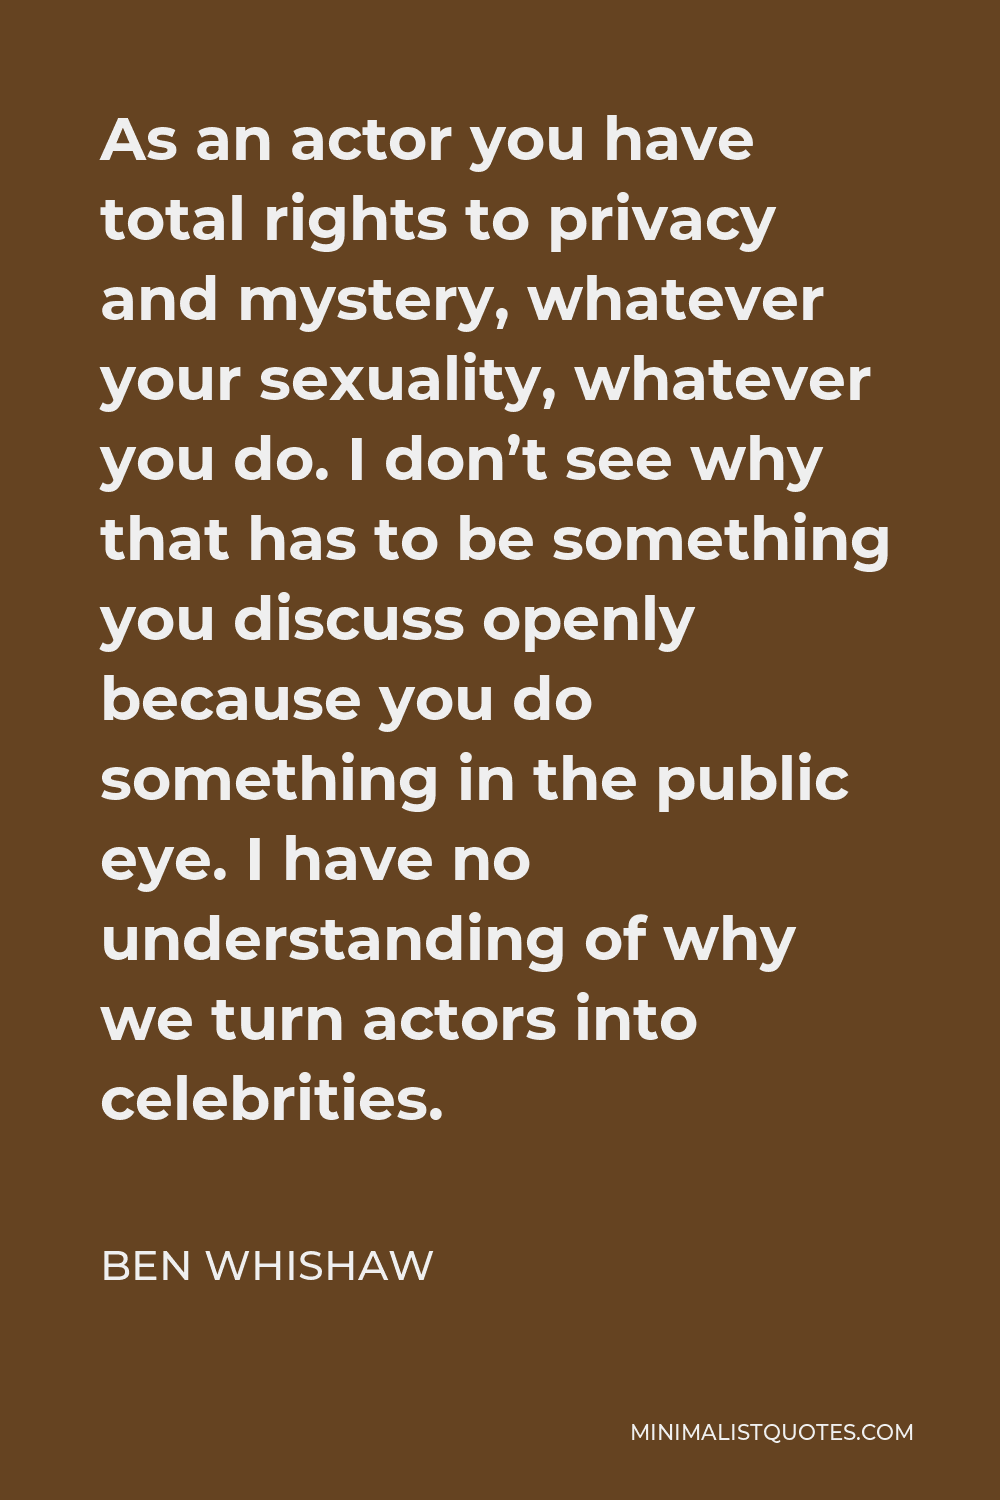 Ben Whishaw Quote - As an actor you have total rights to privacy and mystery, whatever your sexuality, whatever you do. I don’t see why that has to be something you discuss openly because you do something in the public eye. I have no understanding of why we turn actors into celebrities.